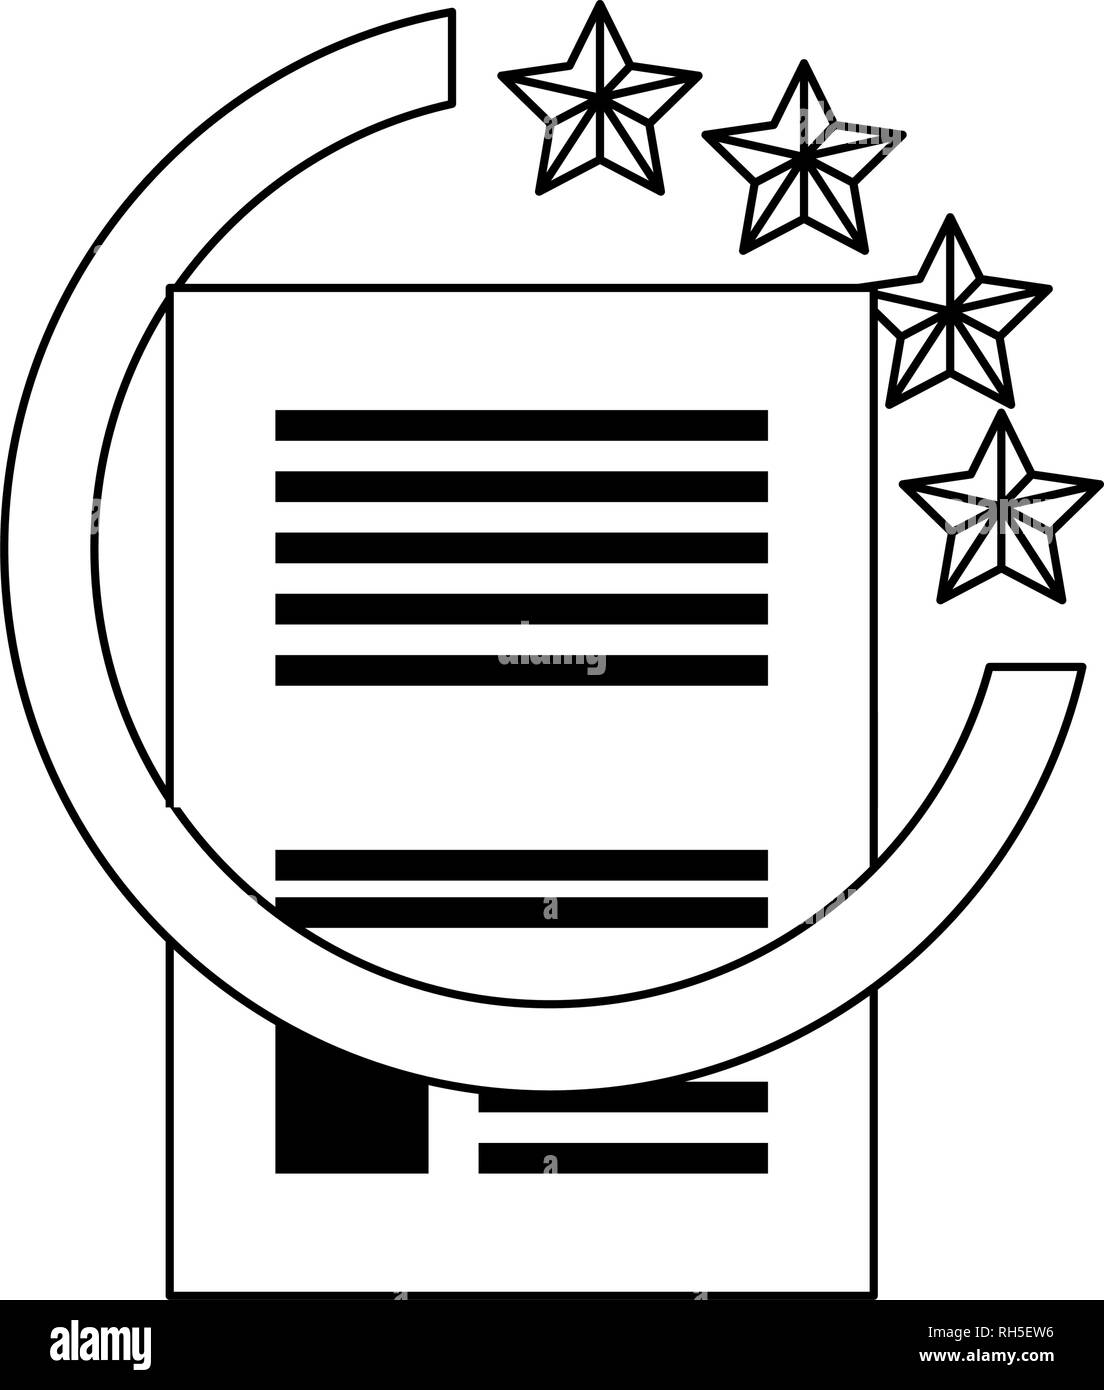 patent contract security stars copyright emblem vector illustration Stock Vector